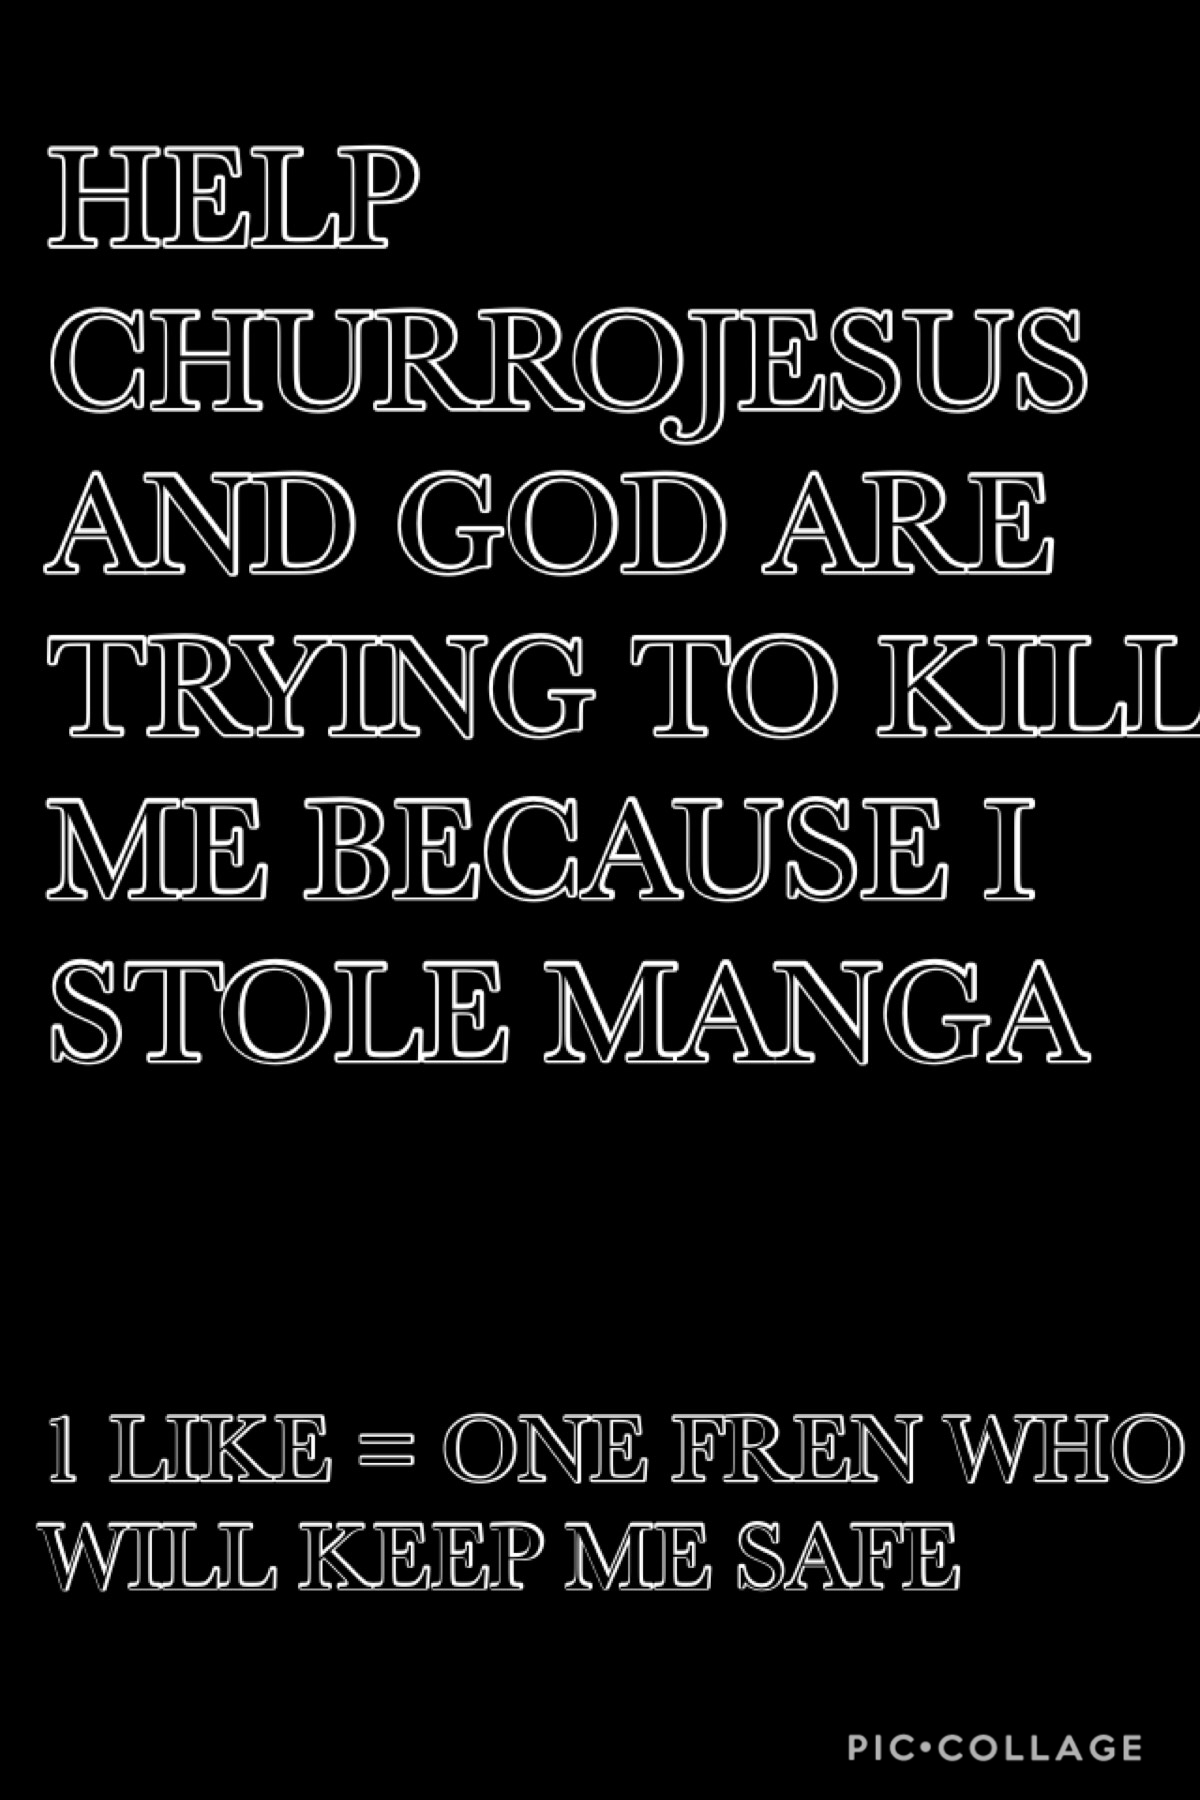 don’t ask just plz help me and also follow ChurroJesus so you can make sure they don’t kill me 